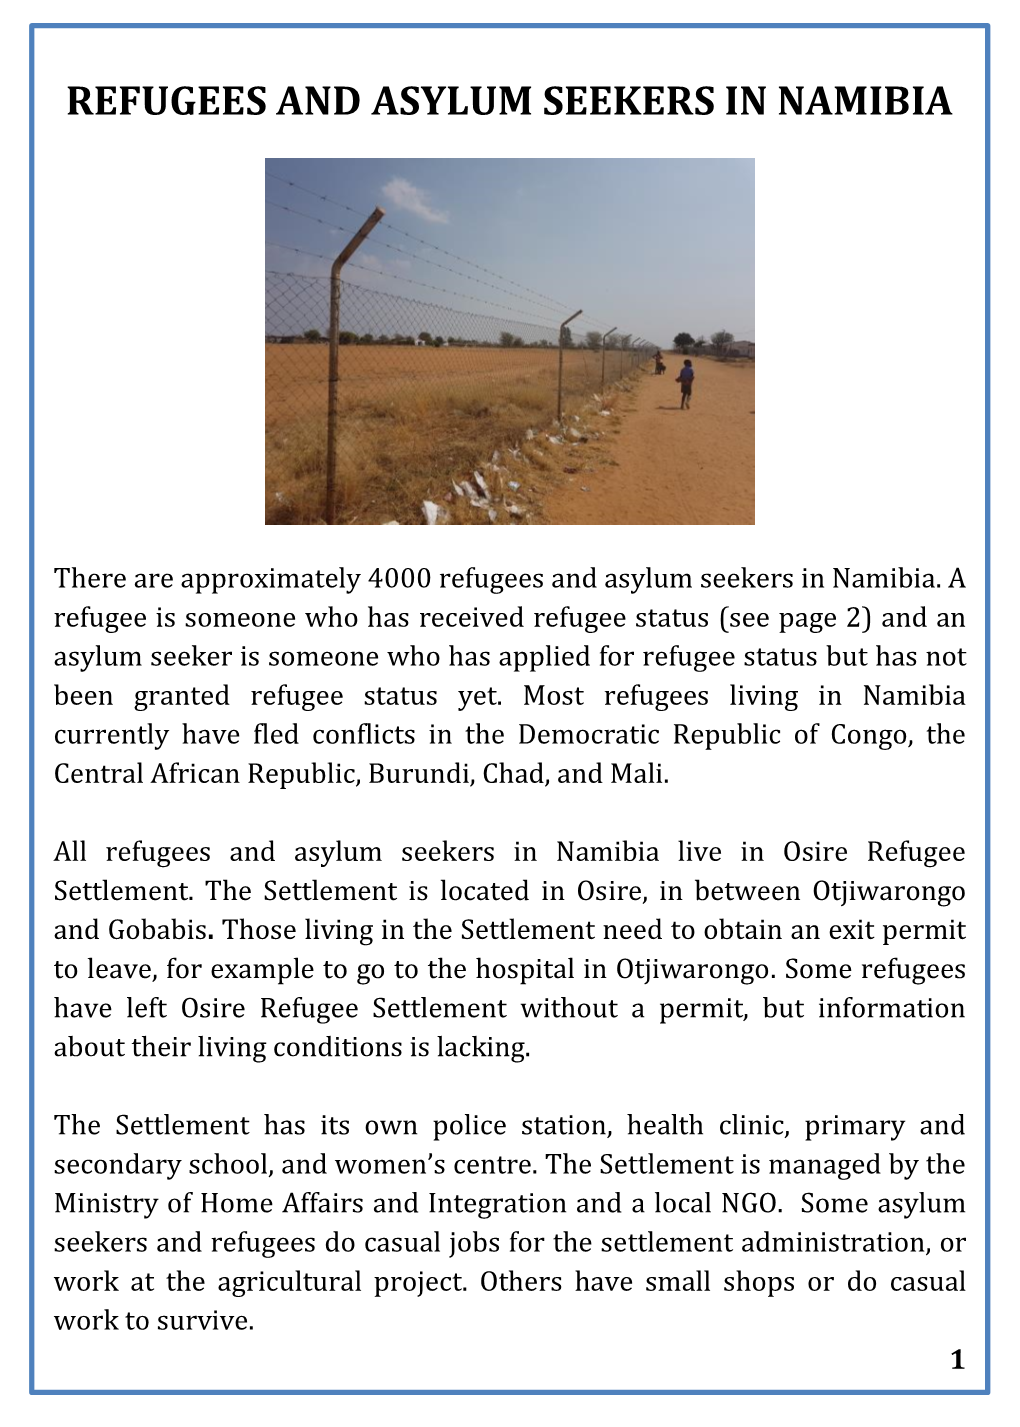 Refugees and Asylum Seekers in Namibia